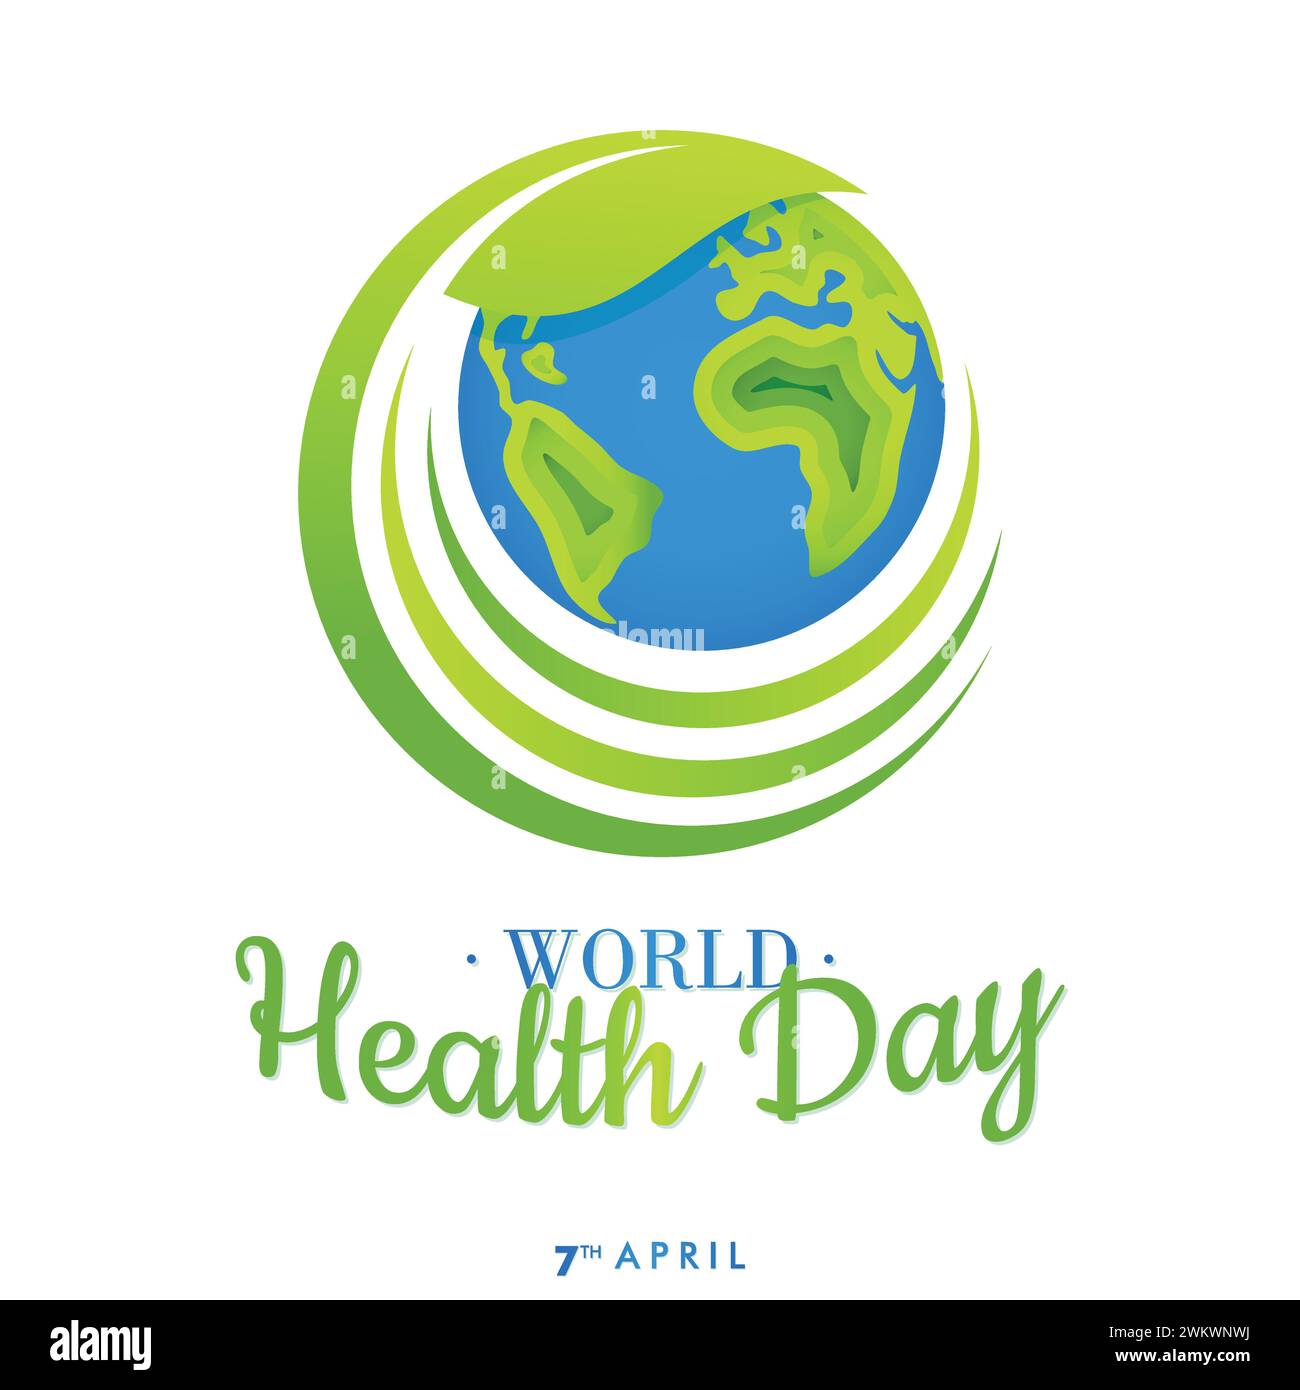 World Health Day is a global health awareness day celebrated every year on 7th April. Vector illustration design Stock Vector